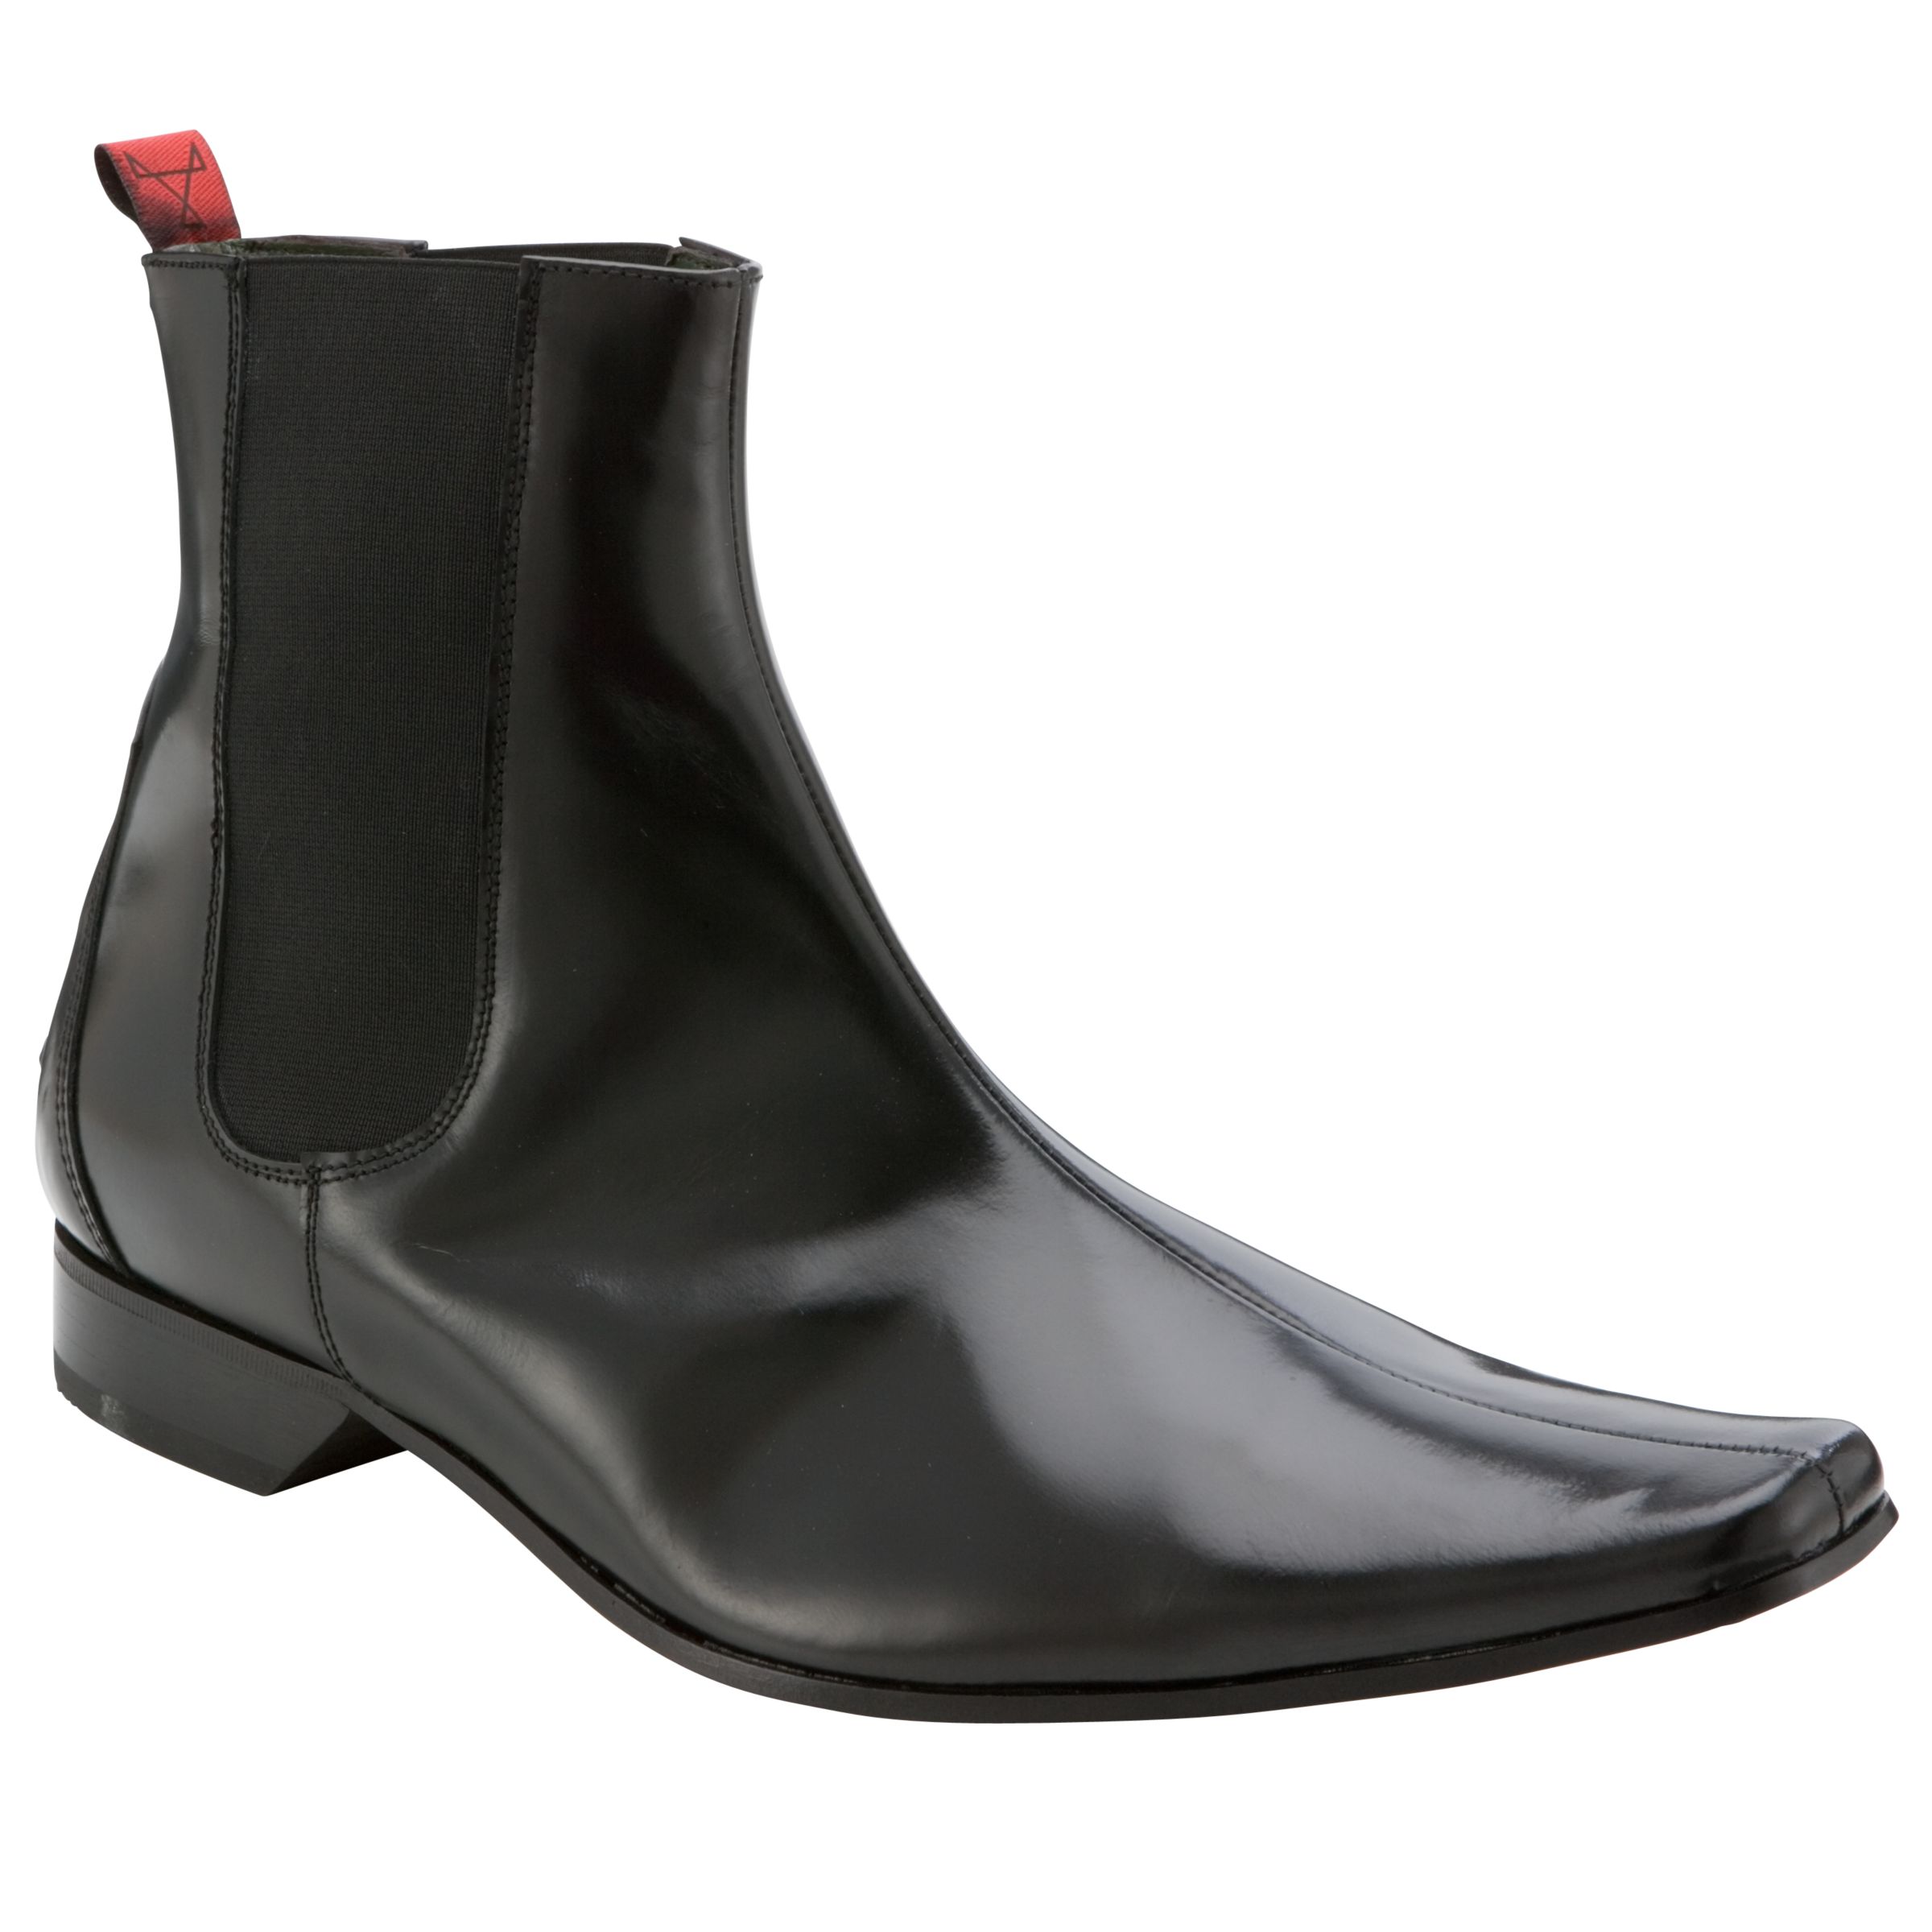 Jeffery West High Shine Patent Chelsea Boots, Brown at John Lewis